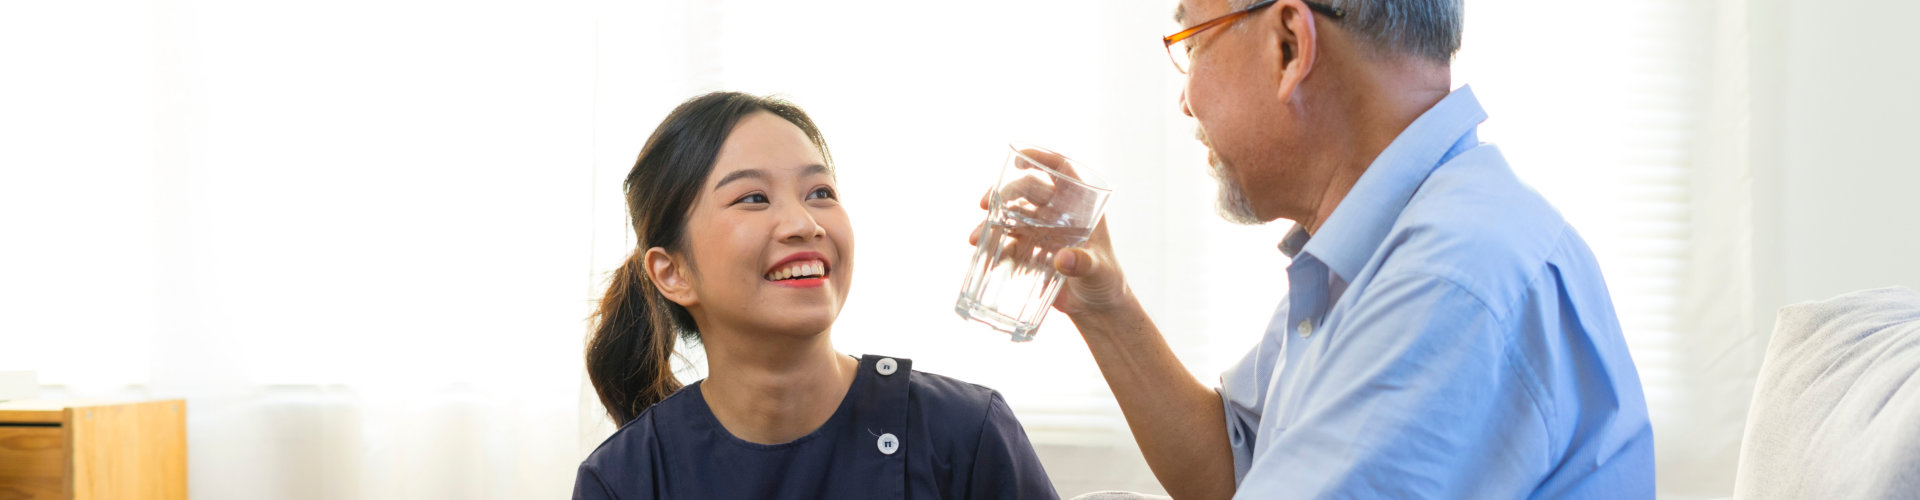 Smiling nurse giving glass of water to senior